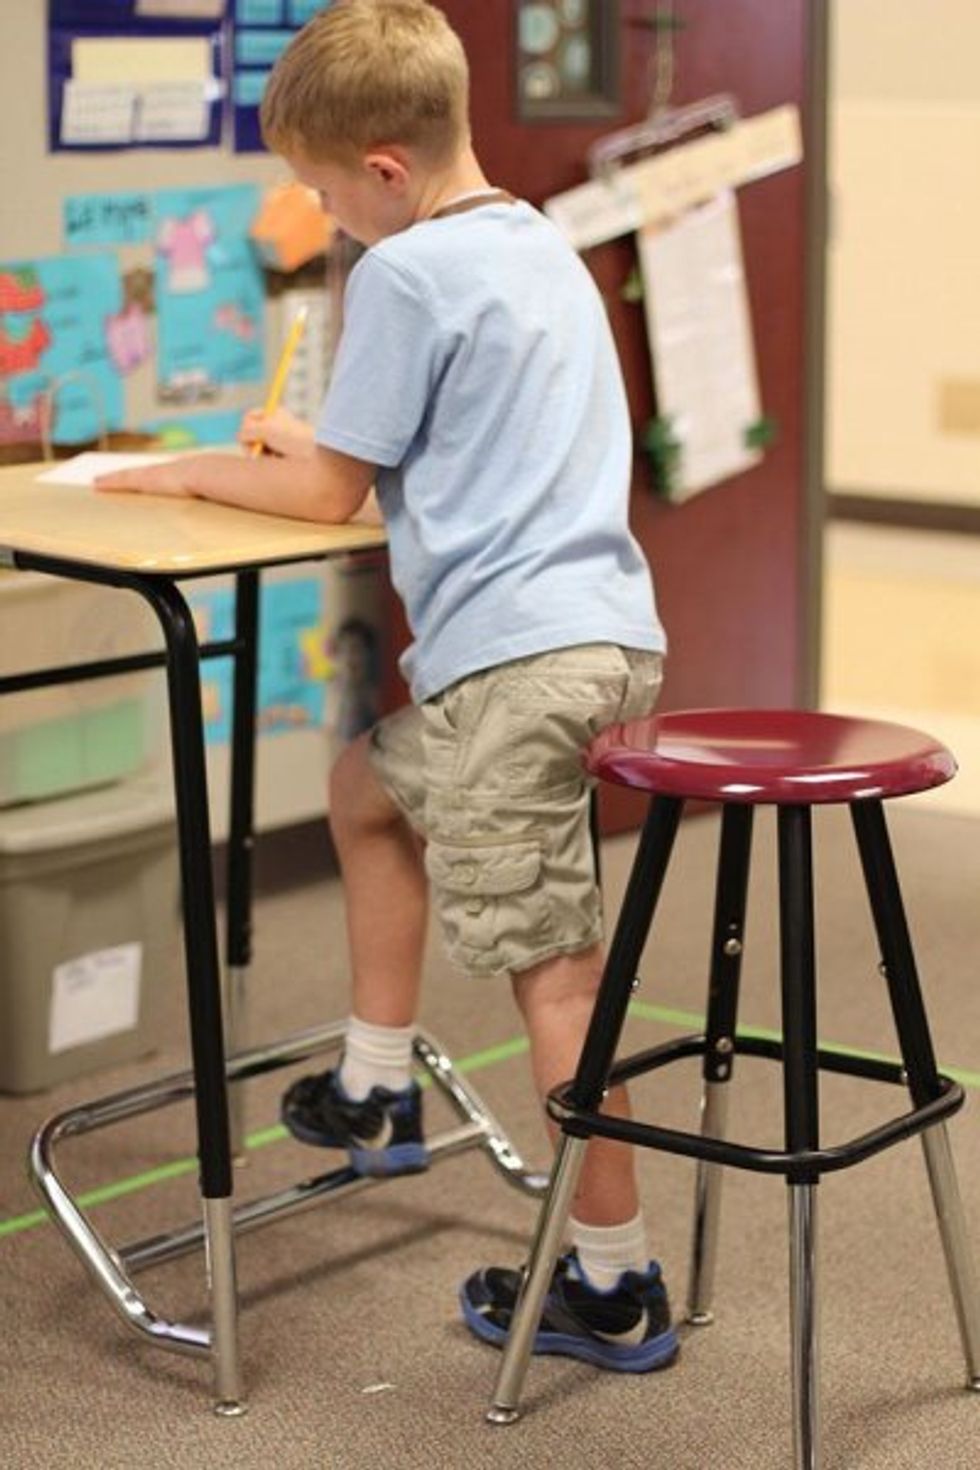 Standing Desk Movement Heads Into Schools, Studies Reveal Increased Engagement and Calorie Burn